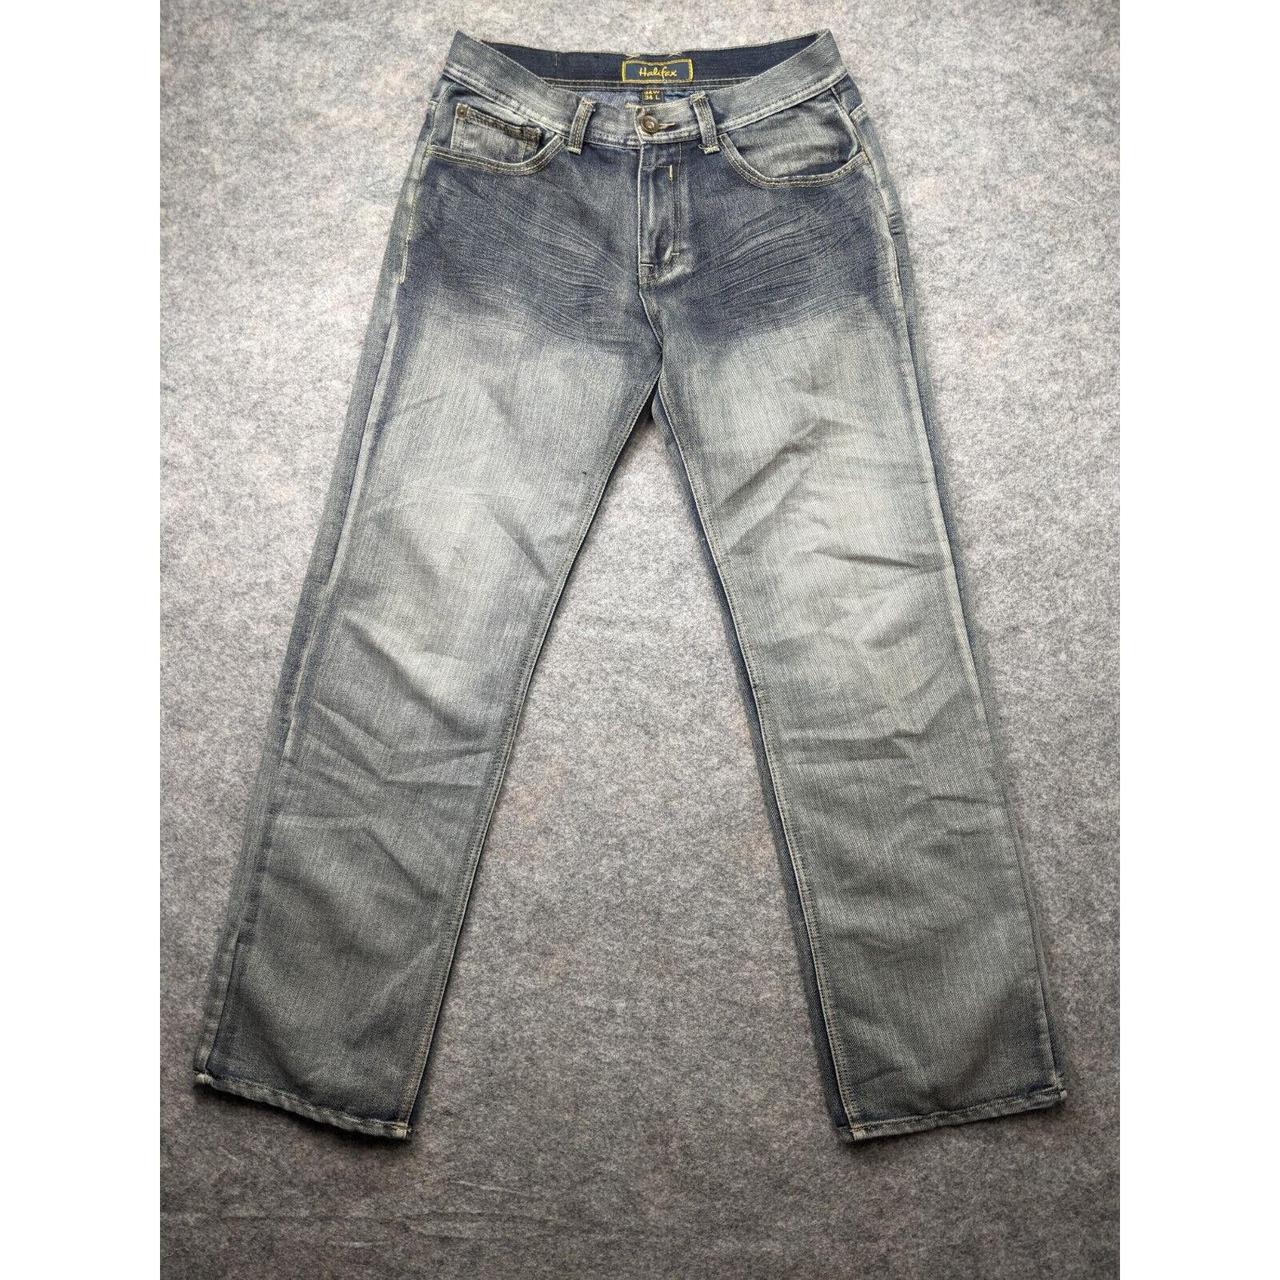 Product Image 3 - Halifax Jeans Men's 32 Straight